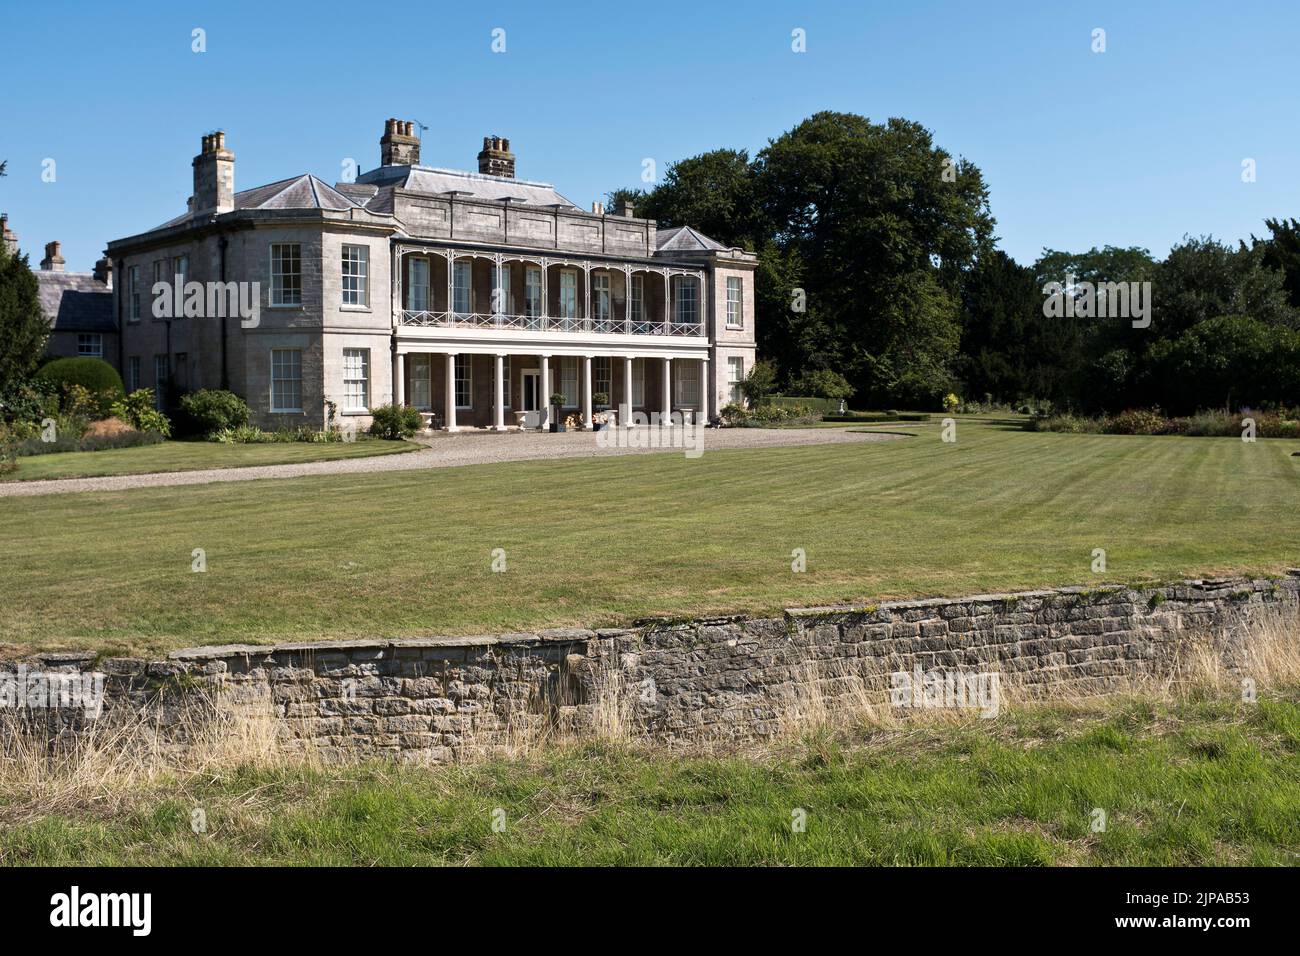 dh Country house NEWTON KYME YORKSHIRE English lawns Ha ha sunken wall vertical walls a garden lawn exterior uk manor mansion Stock Photo